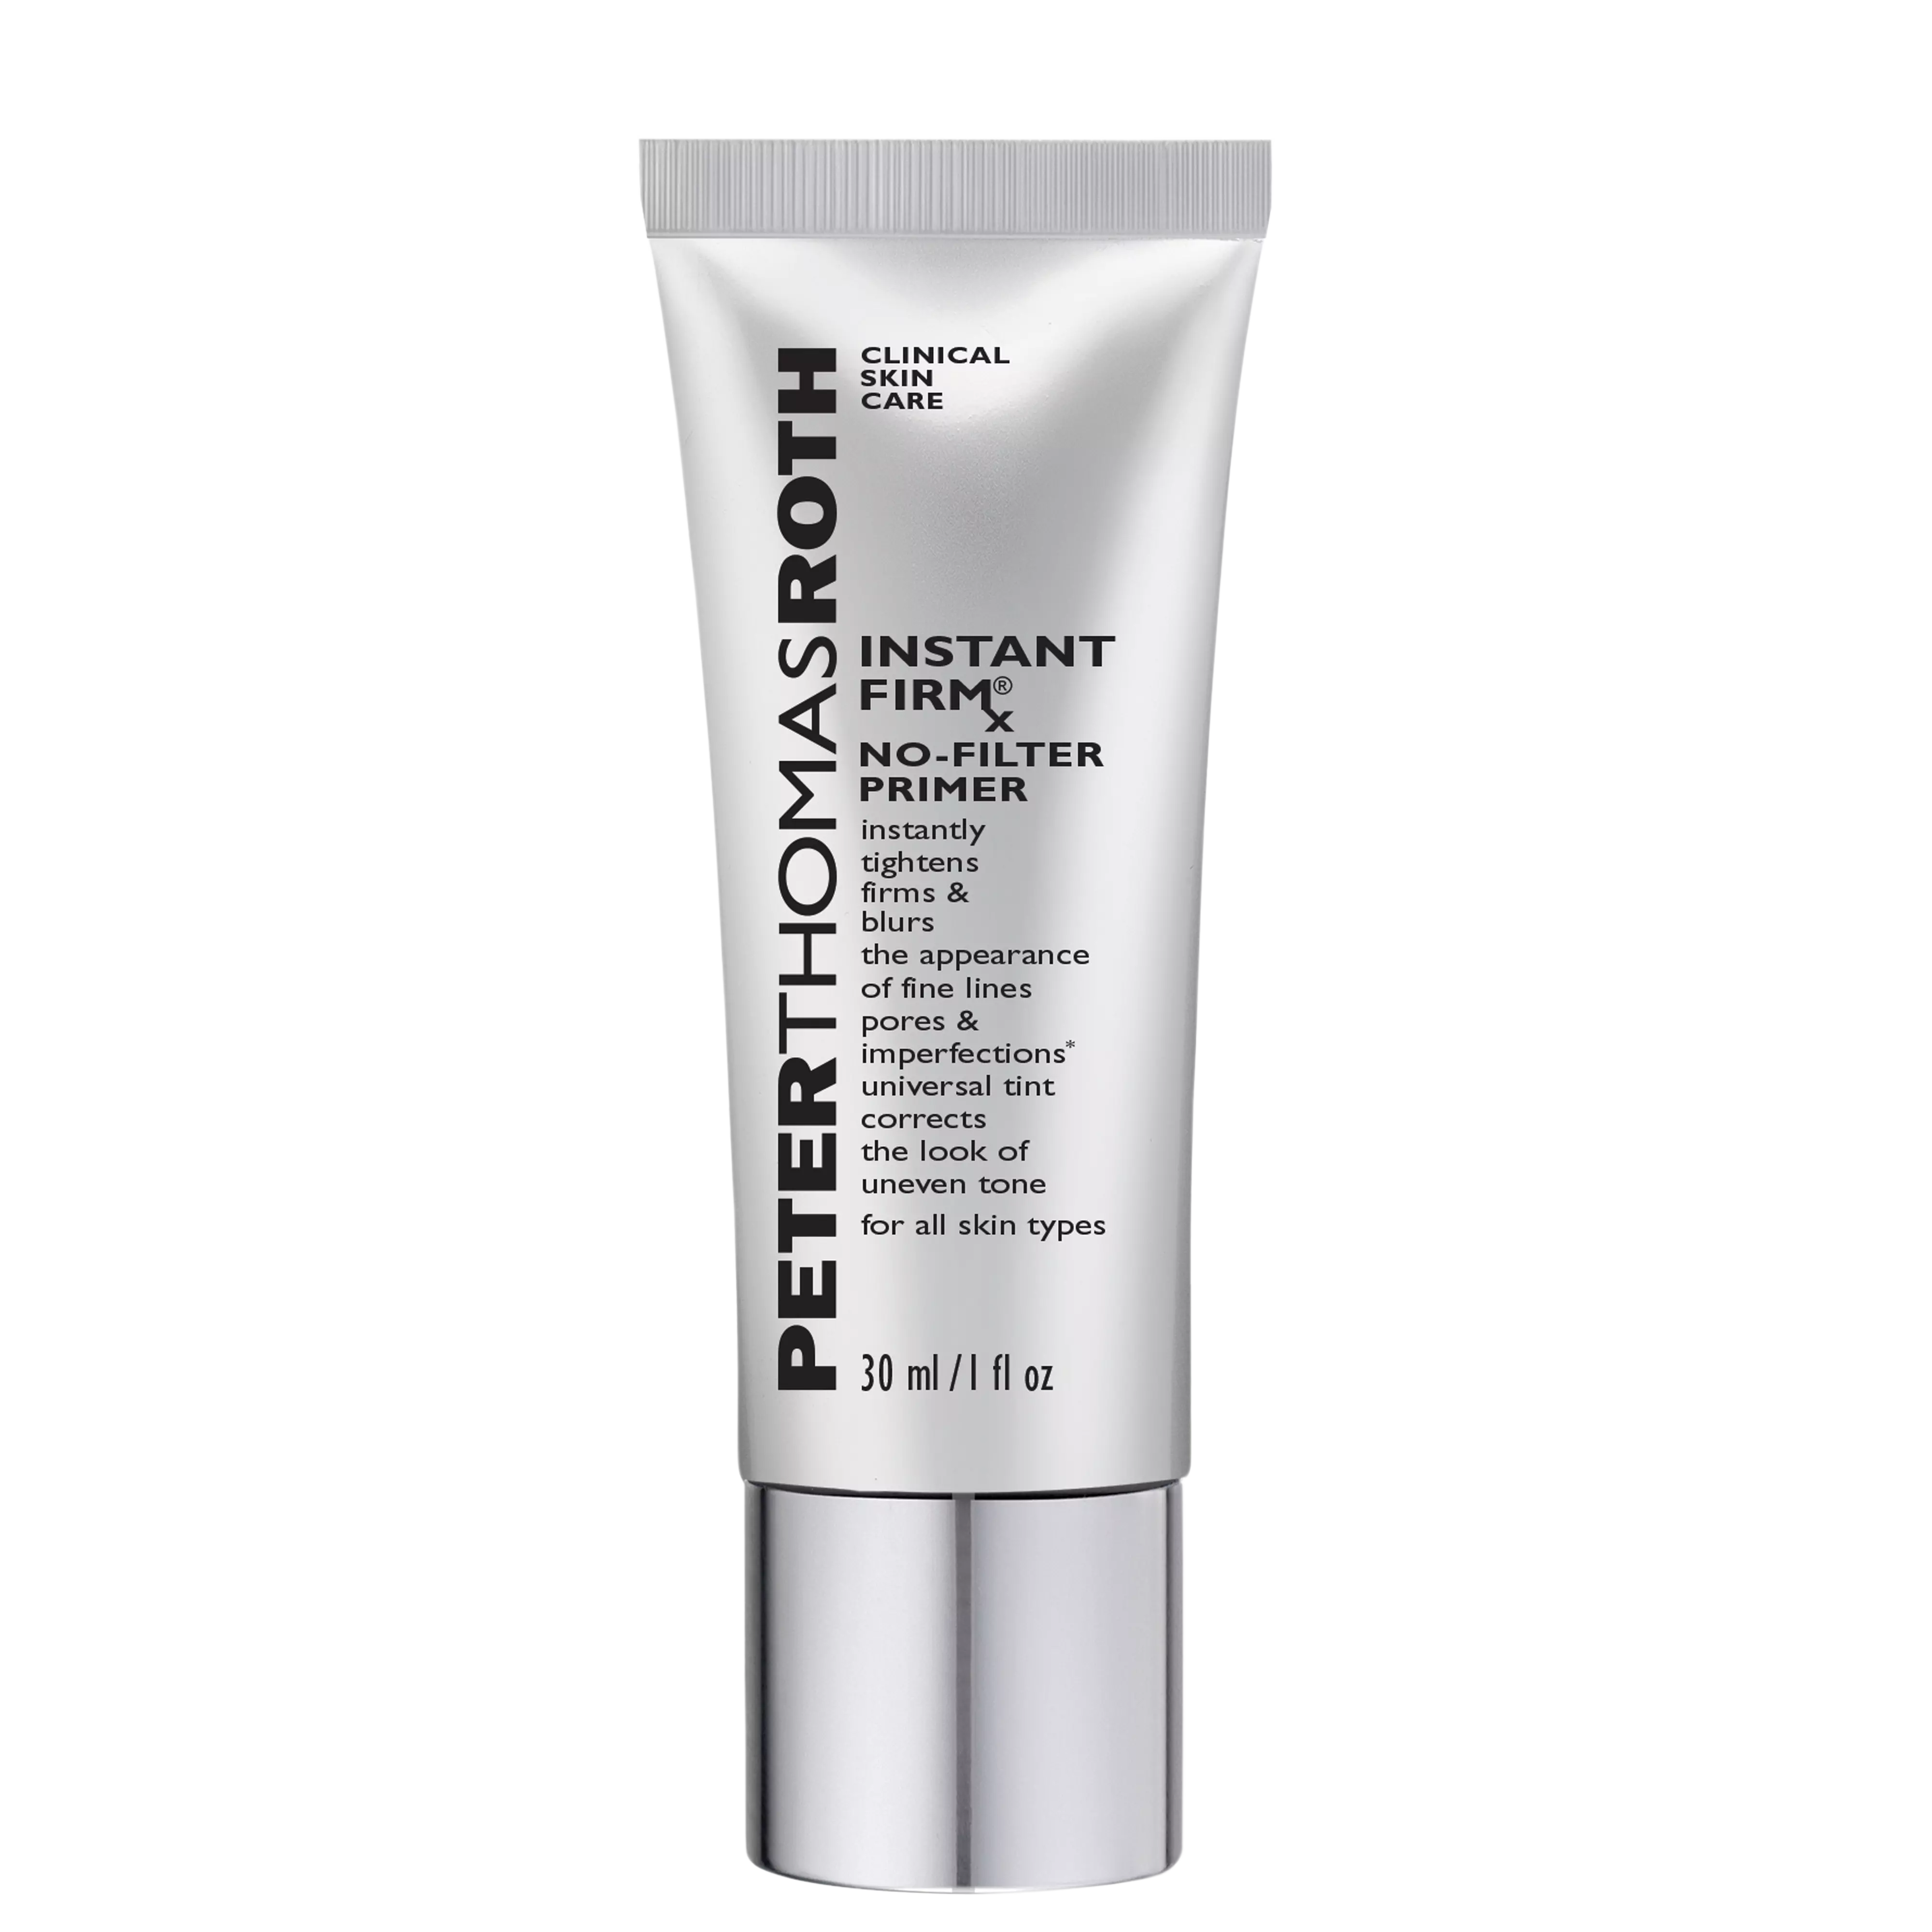 Peter Thomas Roth Instant Firmx No-Filter